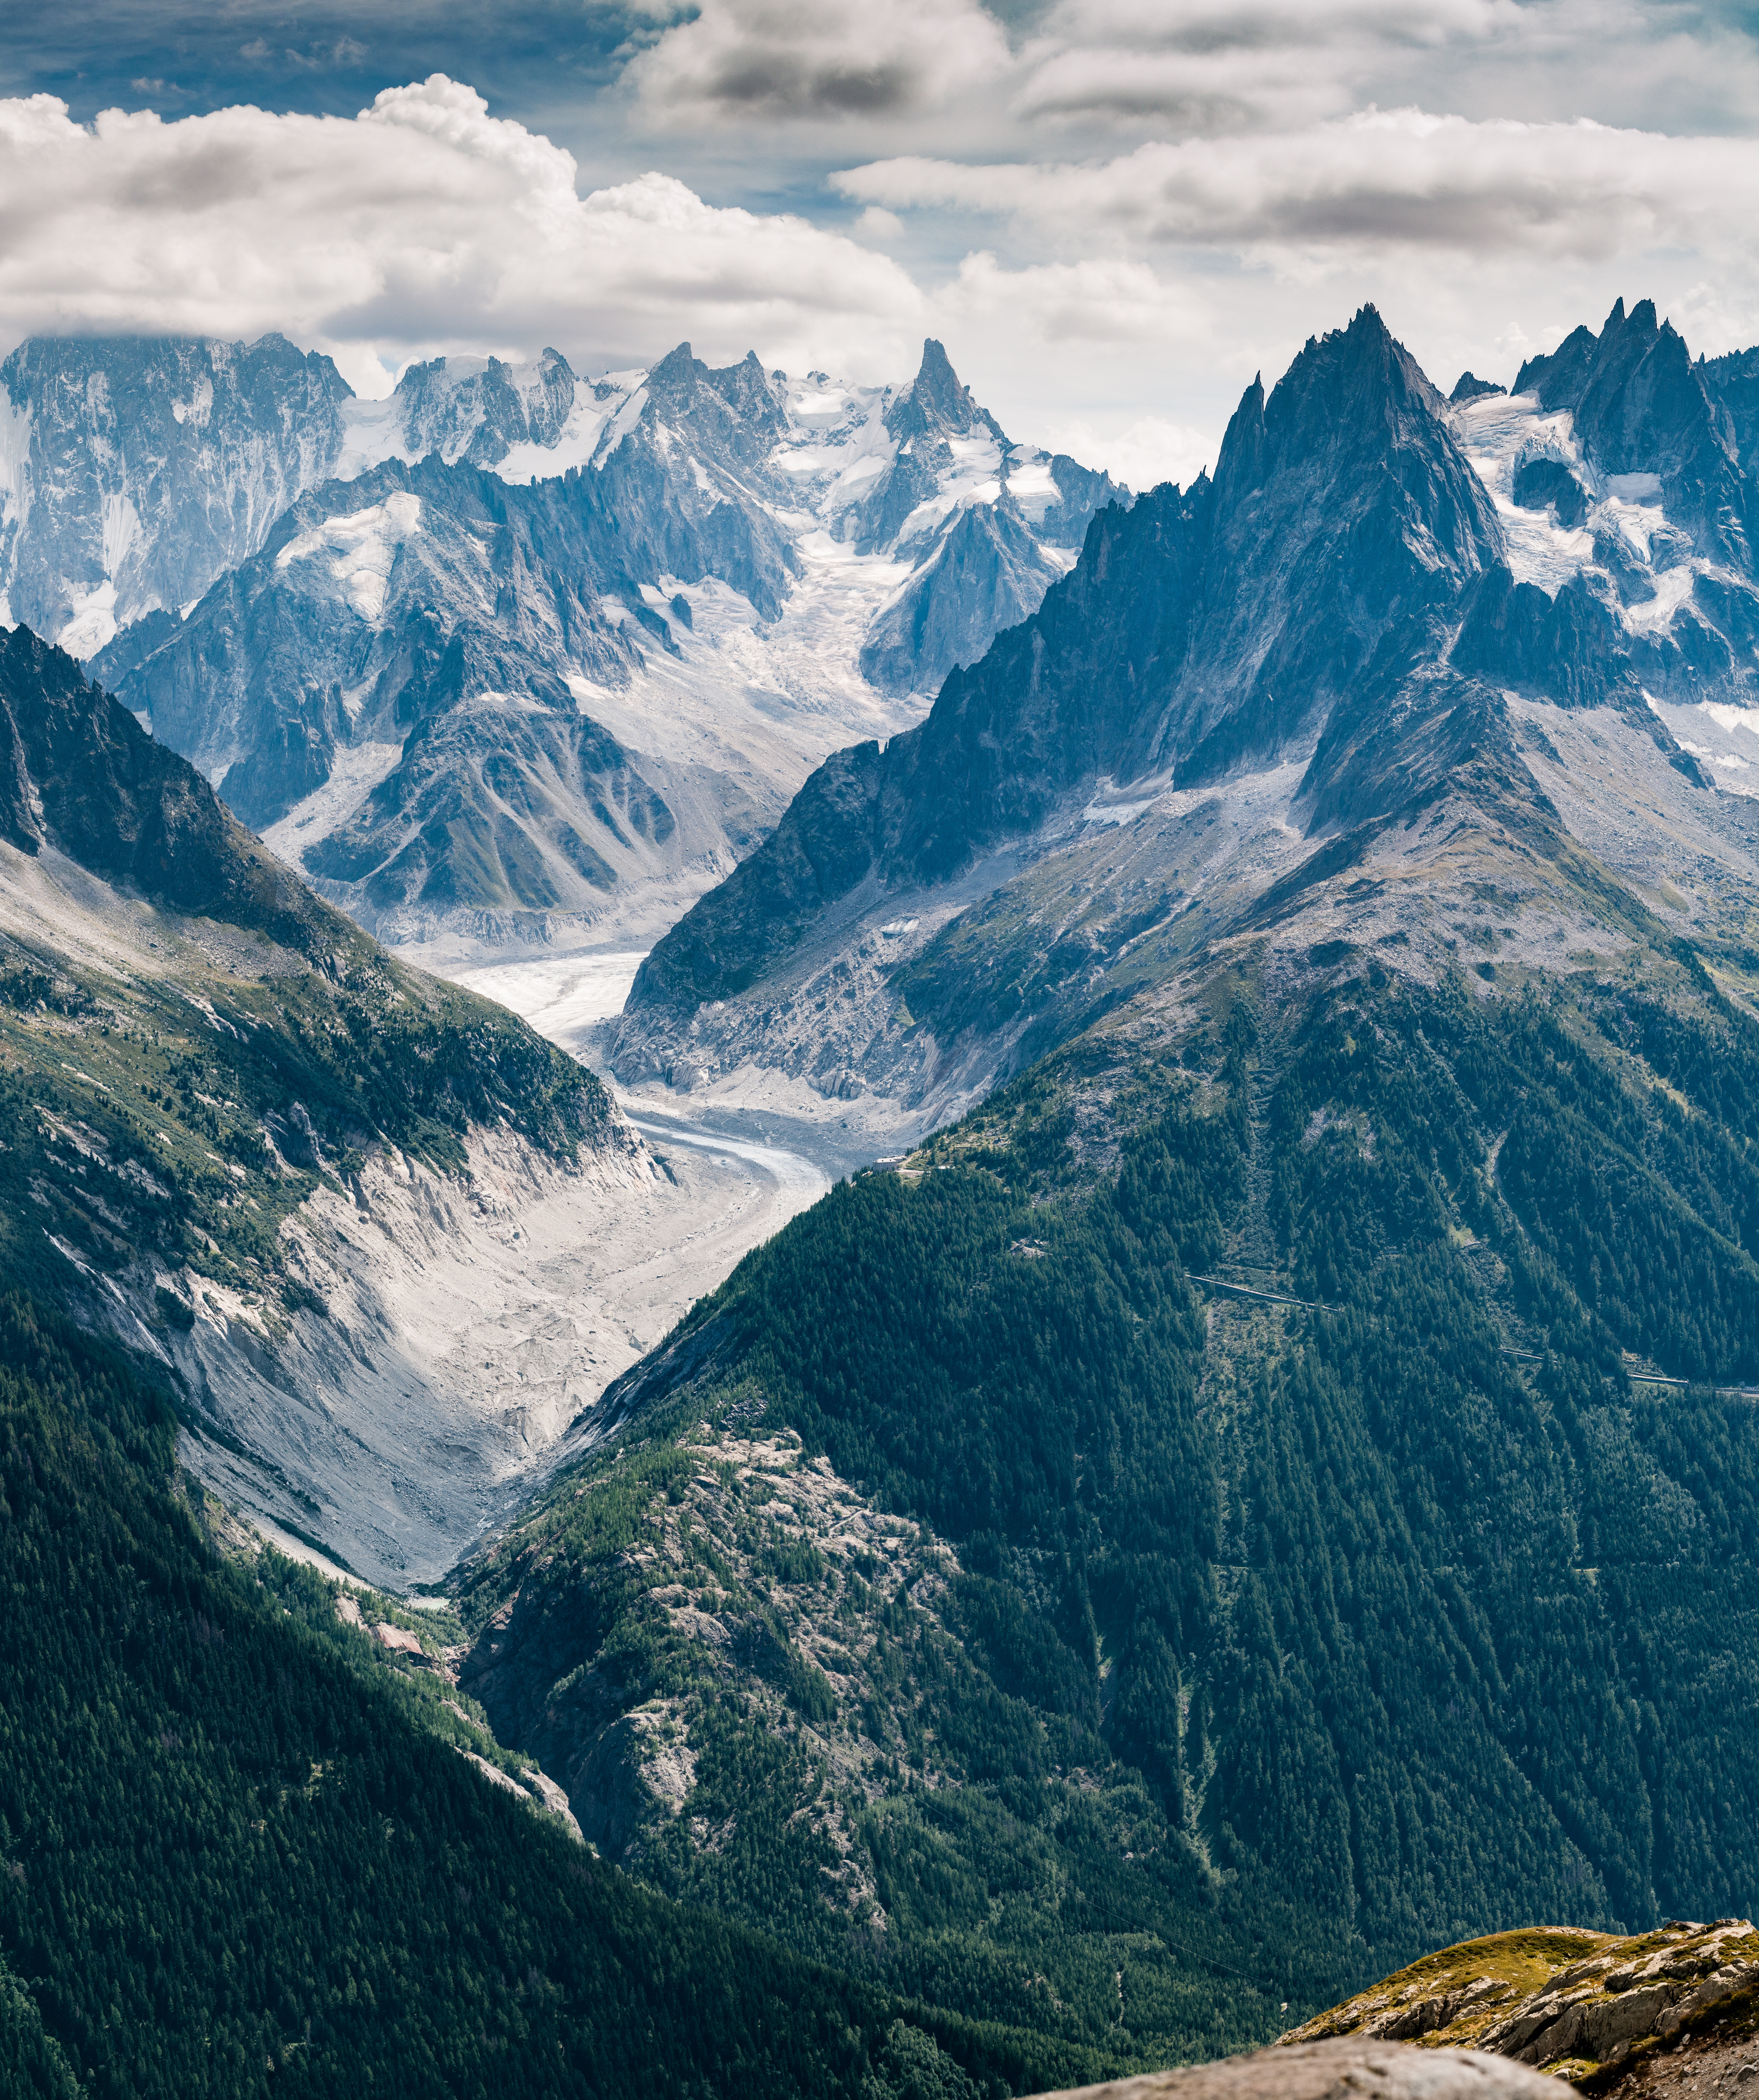 france, nature, mountains, view from above, vertex, road, tops, chamonix High Definition image